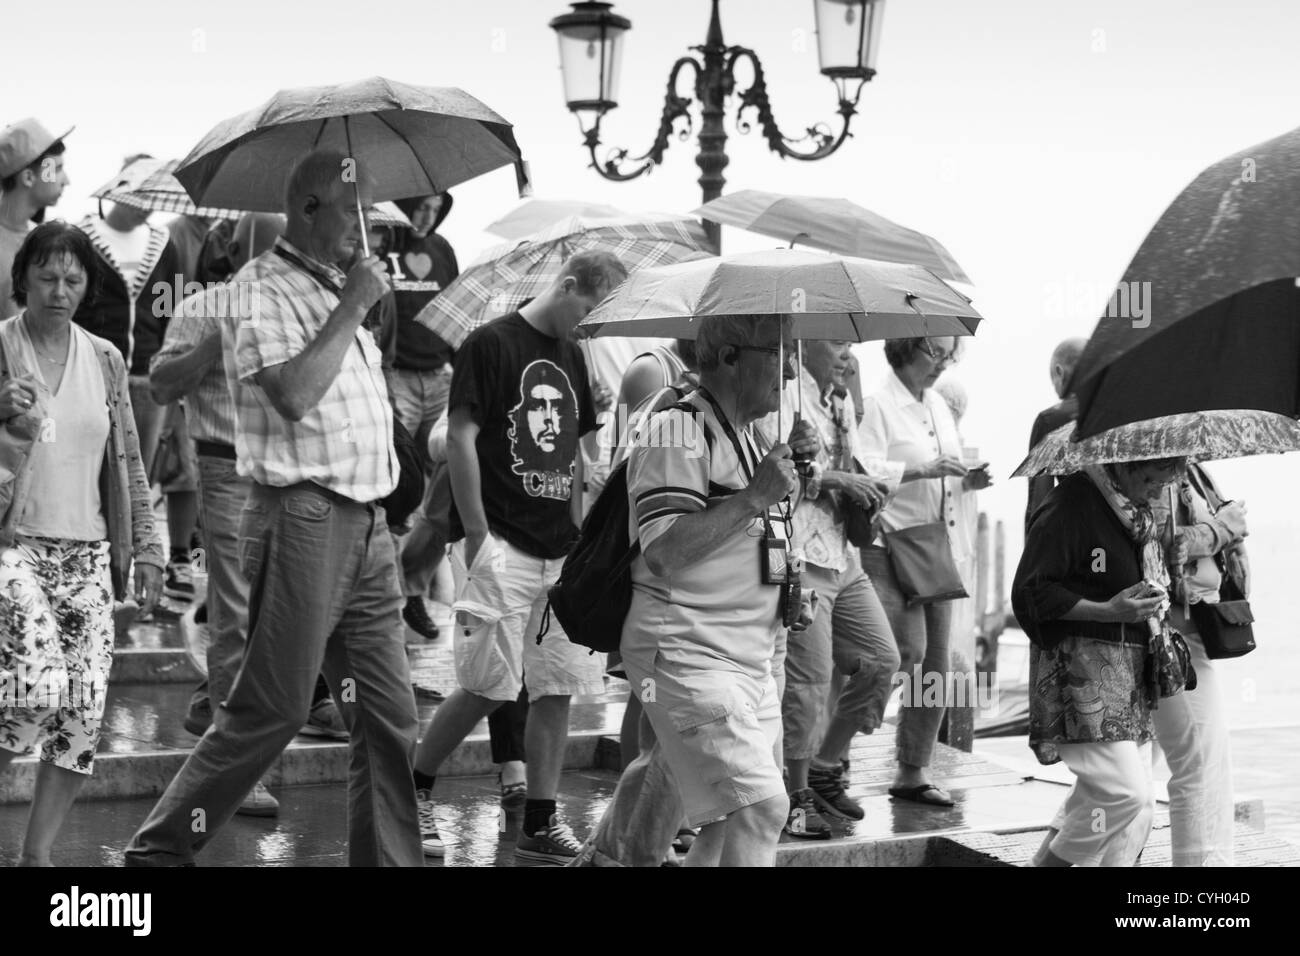 crowds of Tourists in the heavy rain. Venice waterfront. Italy Stock Photo